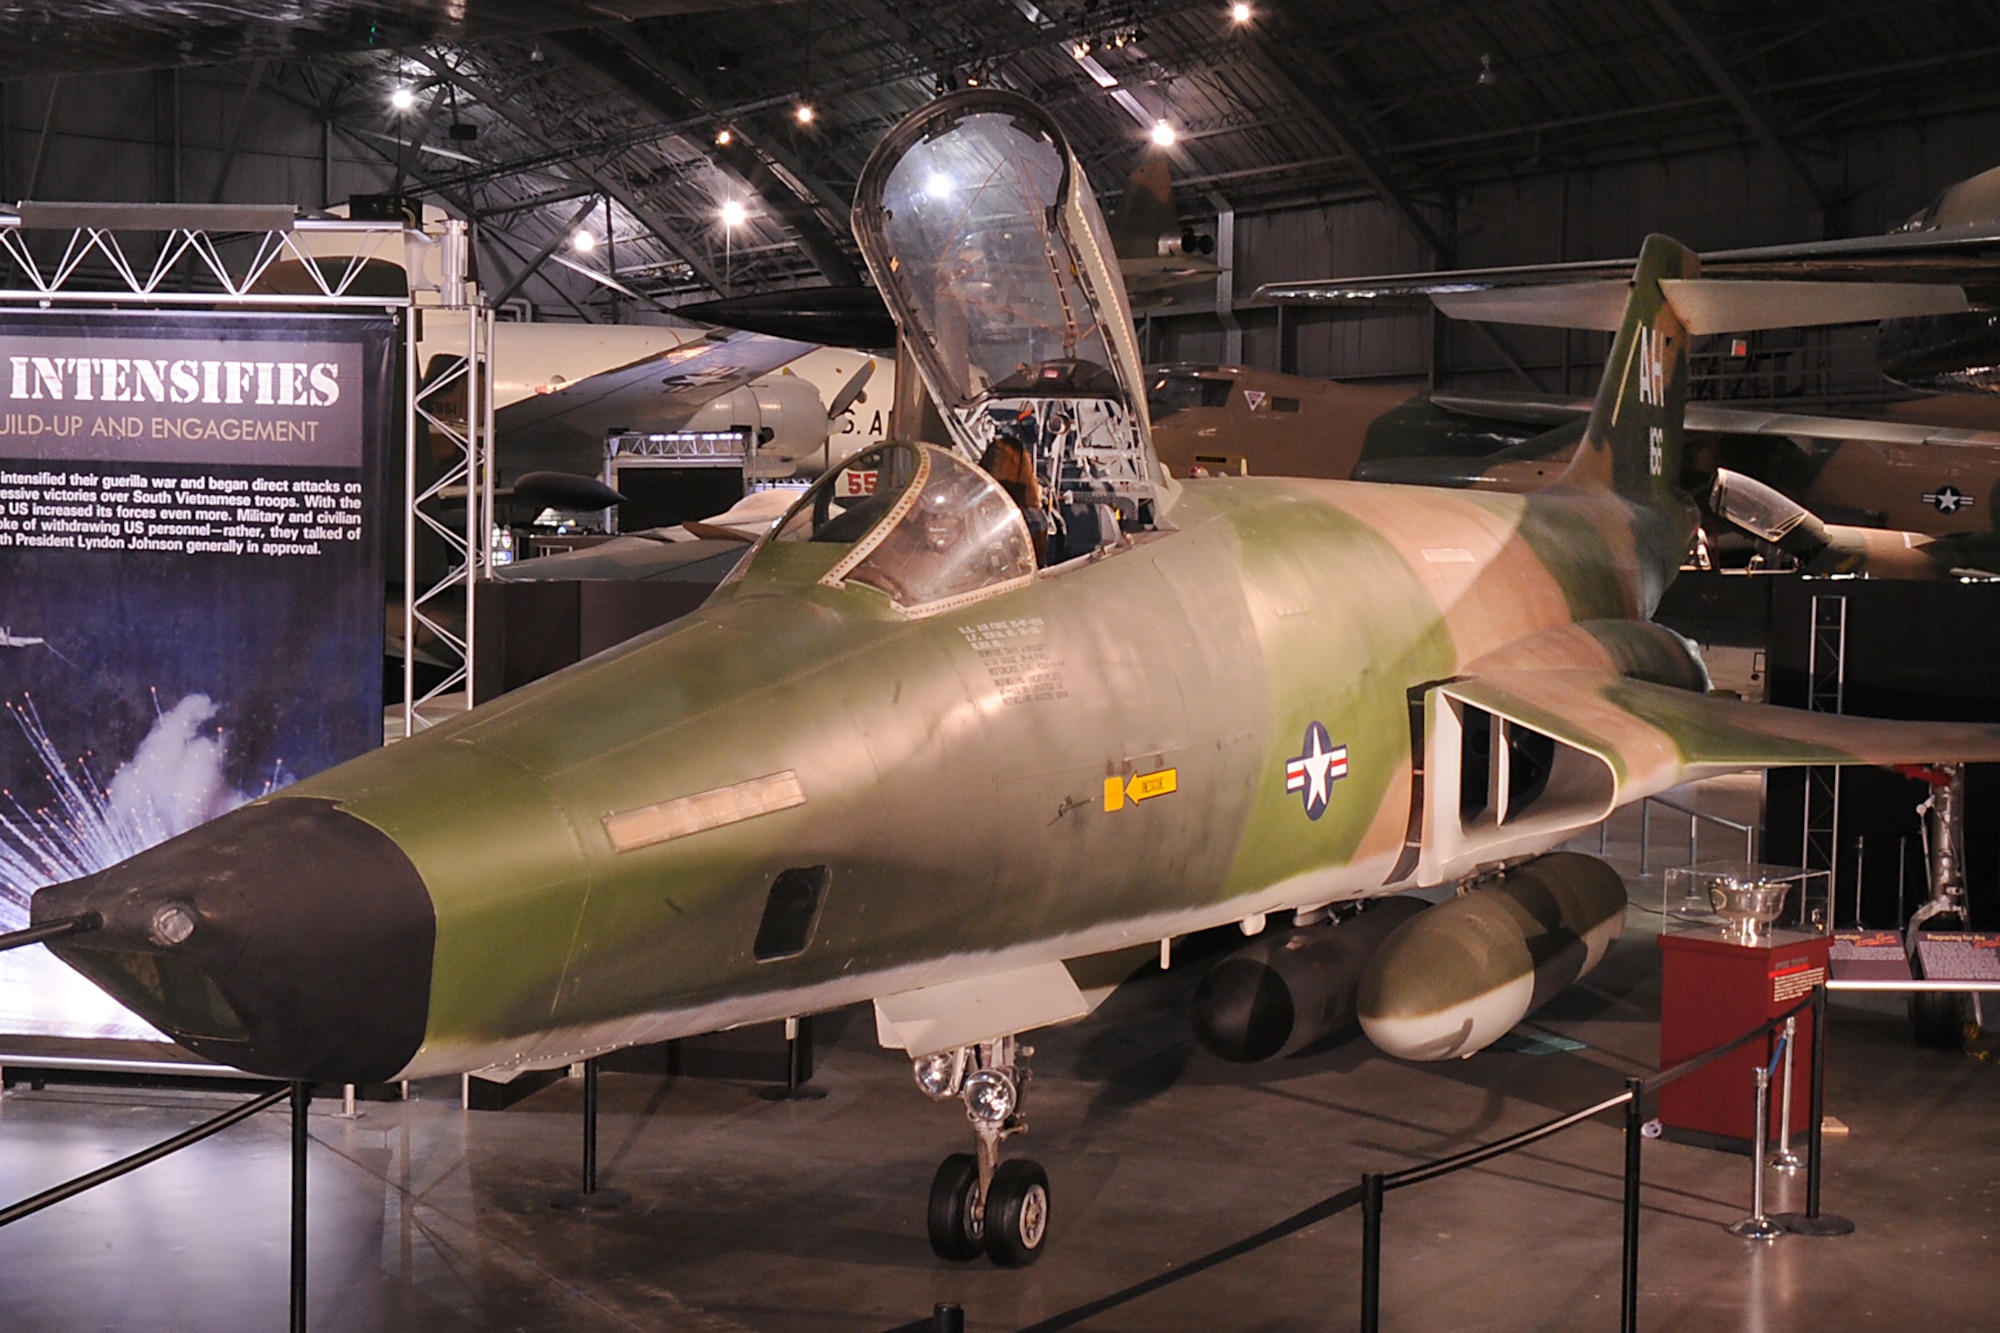 DAYTON, Ohio -- McDonnell RF-101C Voodoo in the Southeast Asia War Gallery at the National Museum of the United States Air Force. (U.S. Air Force photo)
